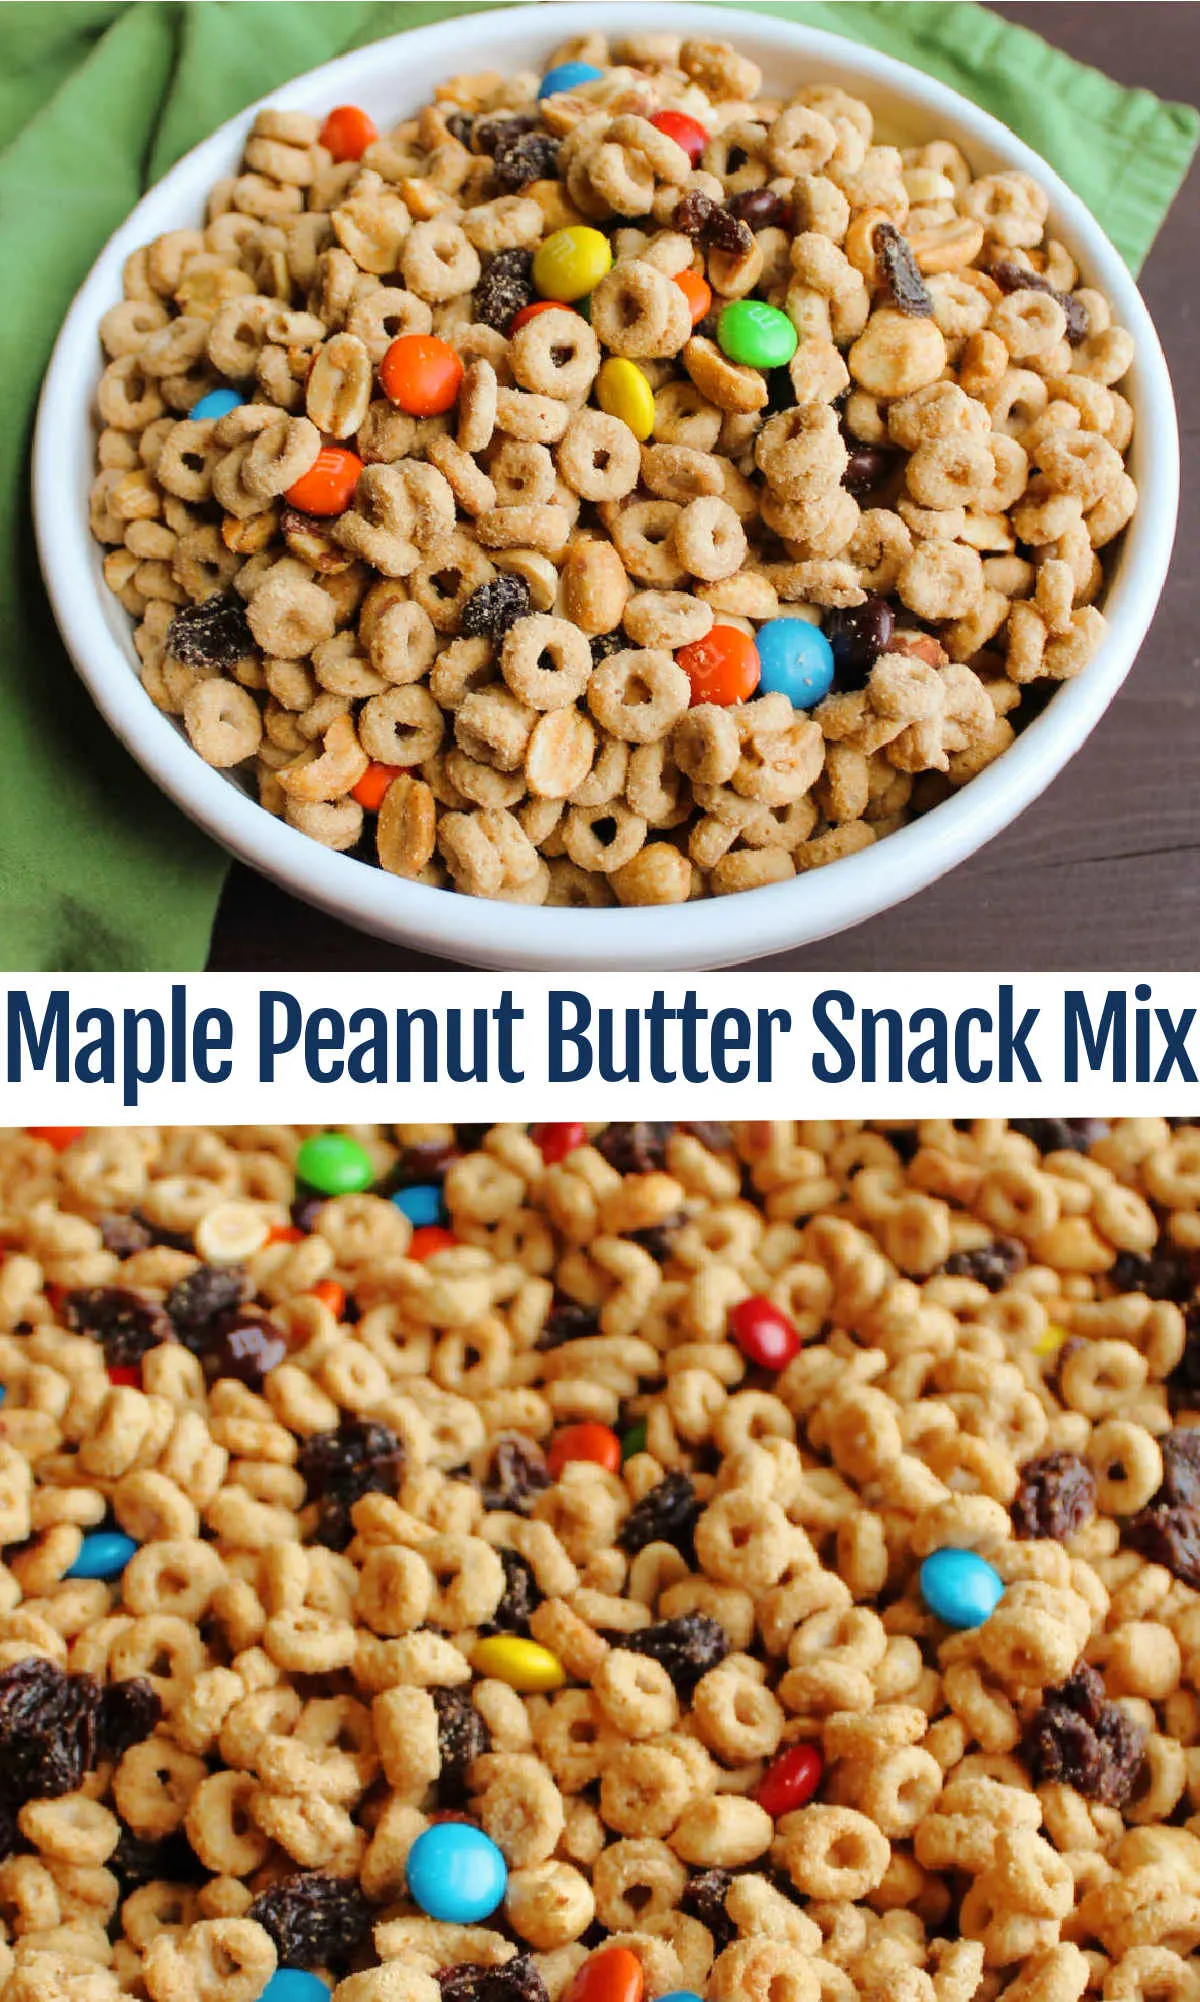 This peanut butter maple snack mix is a perfect after school treat, road trip snack or portable pick me up! It is full of flavor, texture and plenty of crunch.